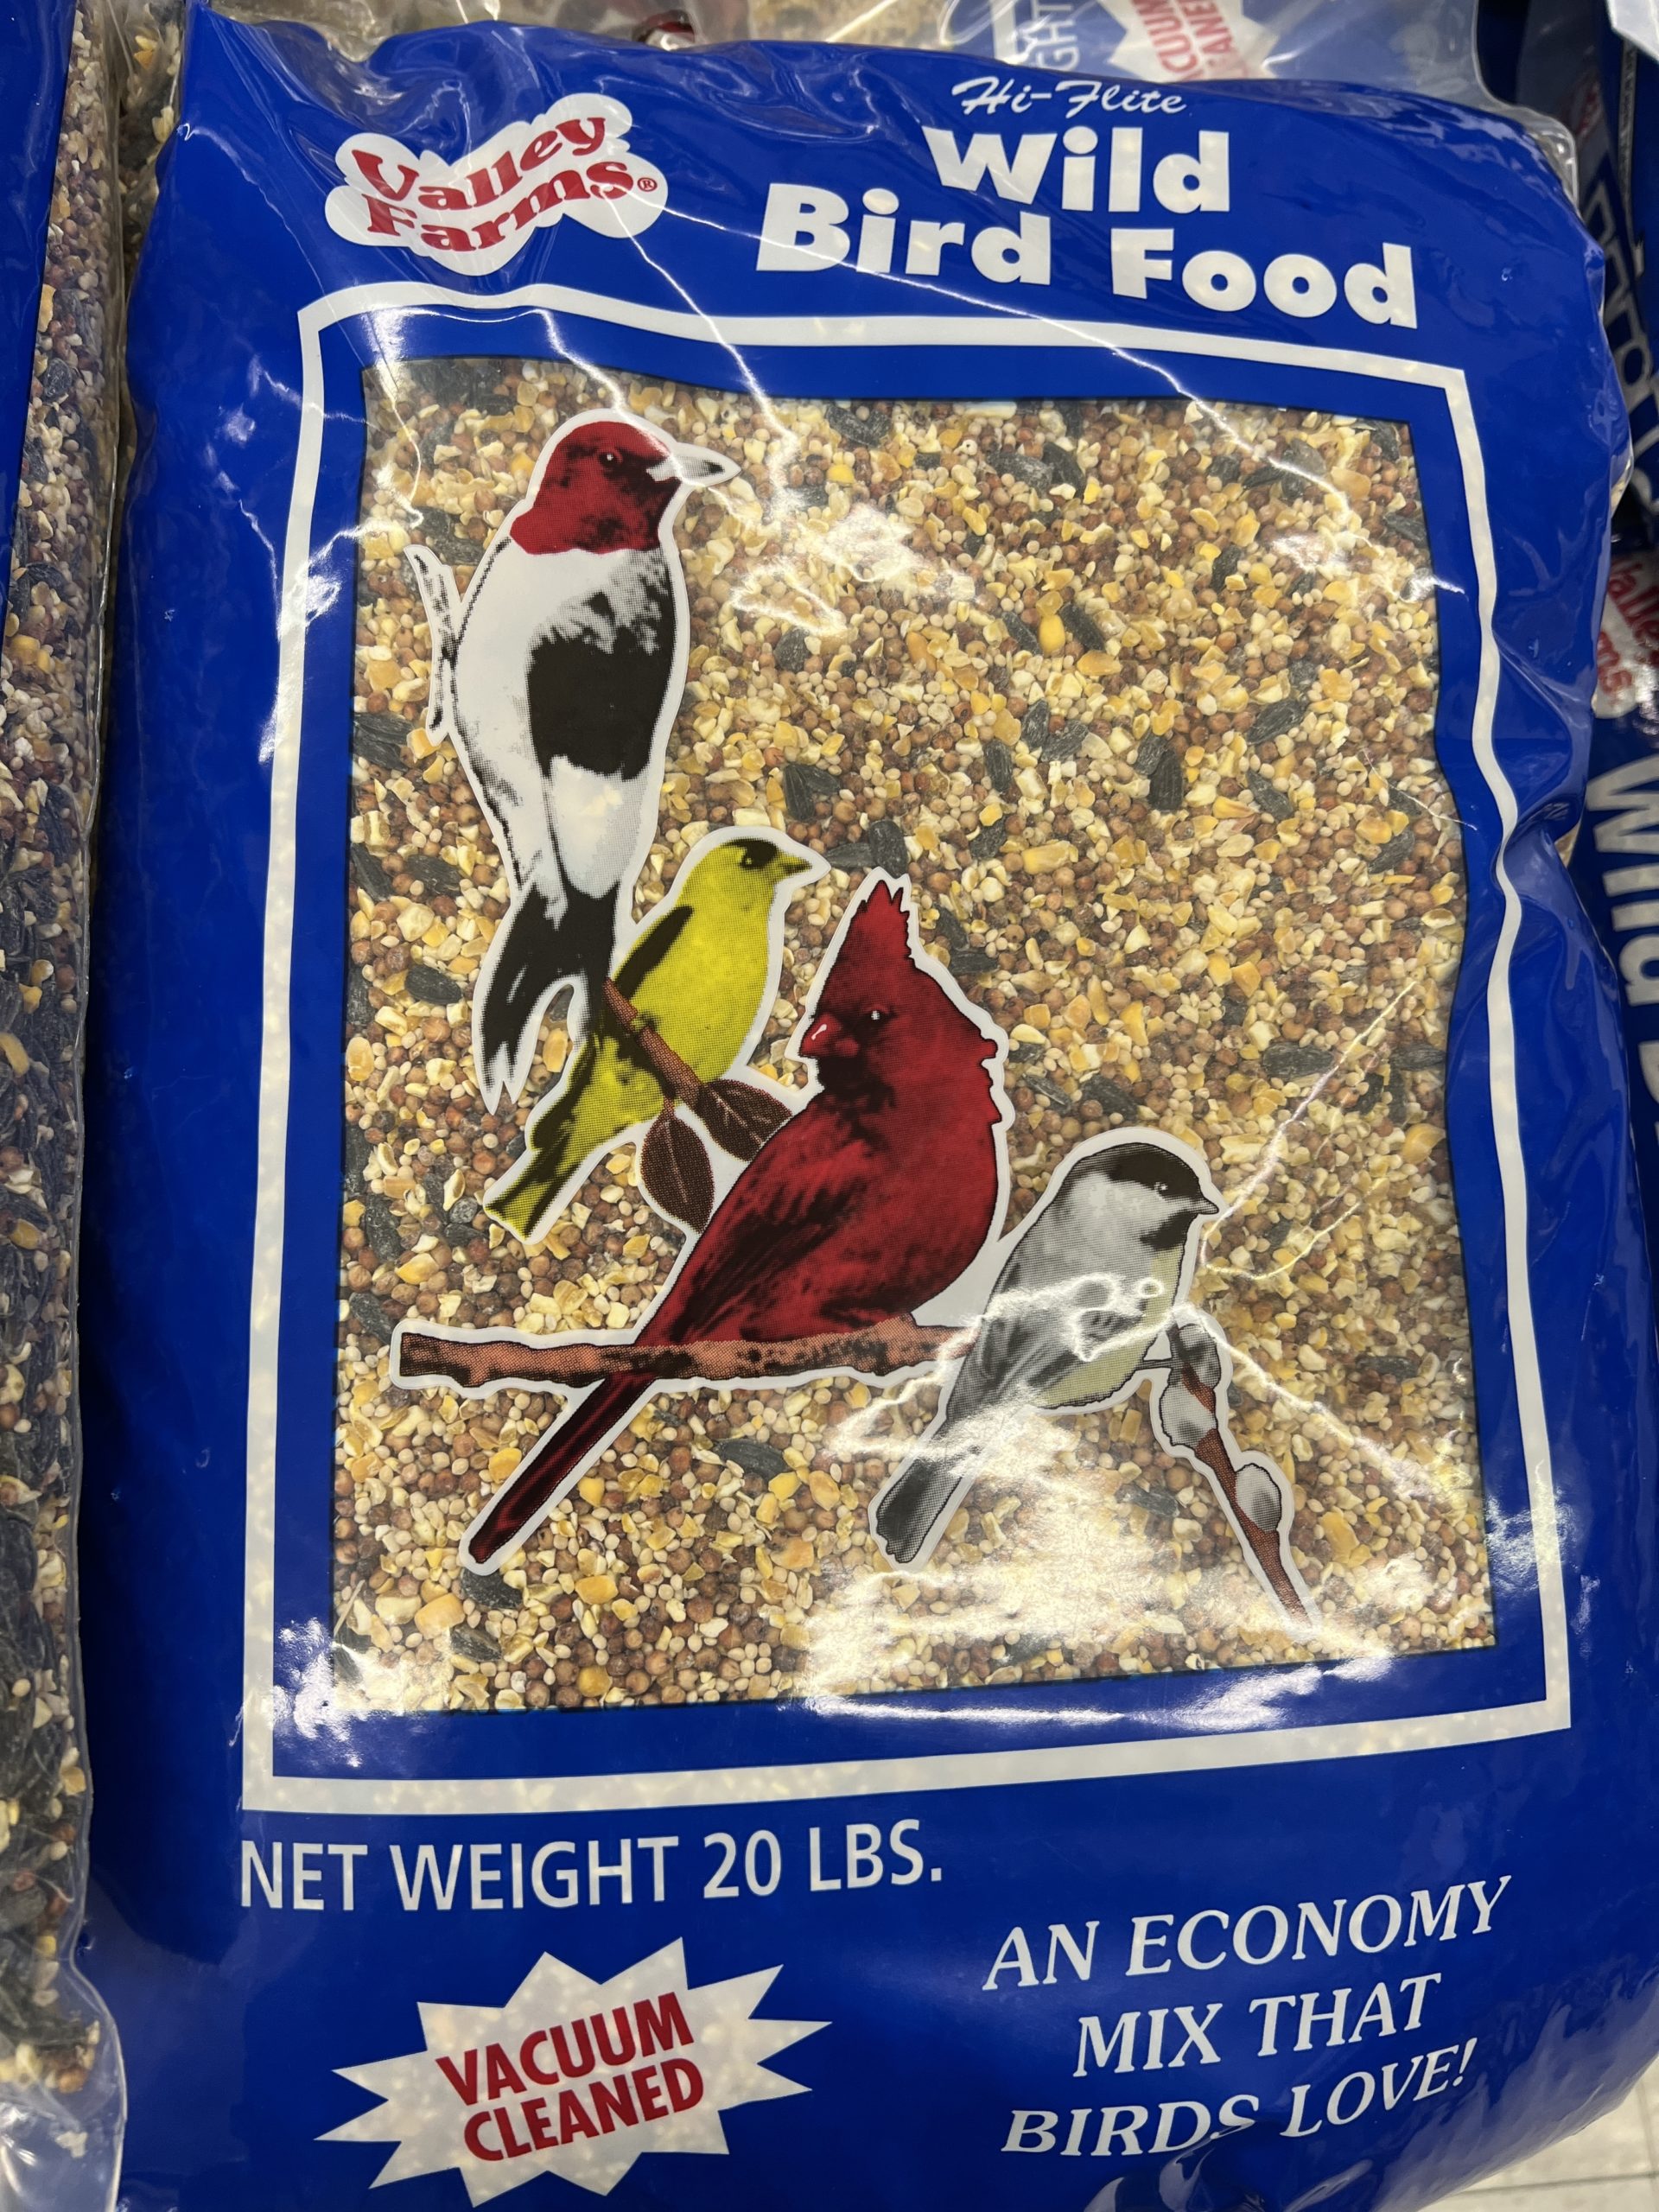 Beware of economy bird seed mixes. They cost much less, but contain many types of seeds that the birds will simply let drop to the ground.